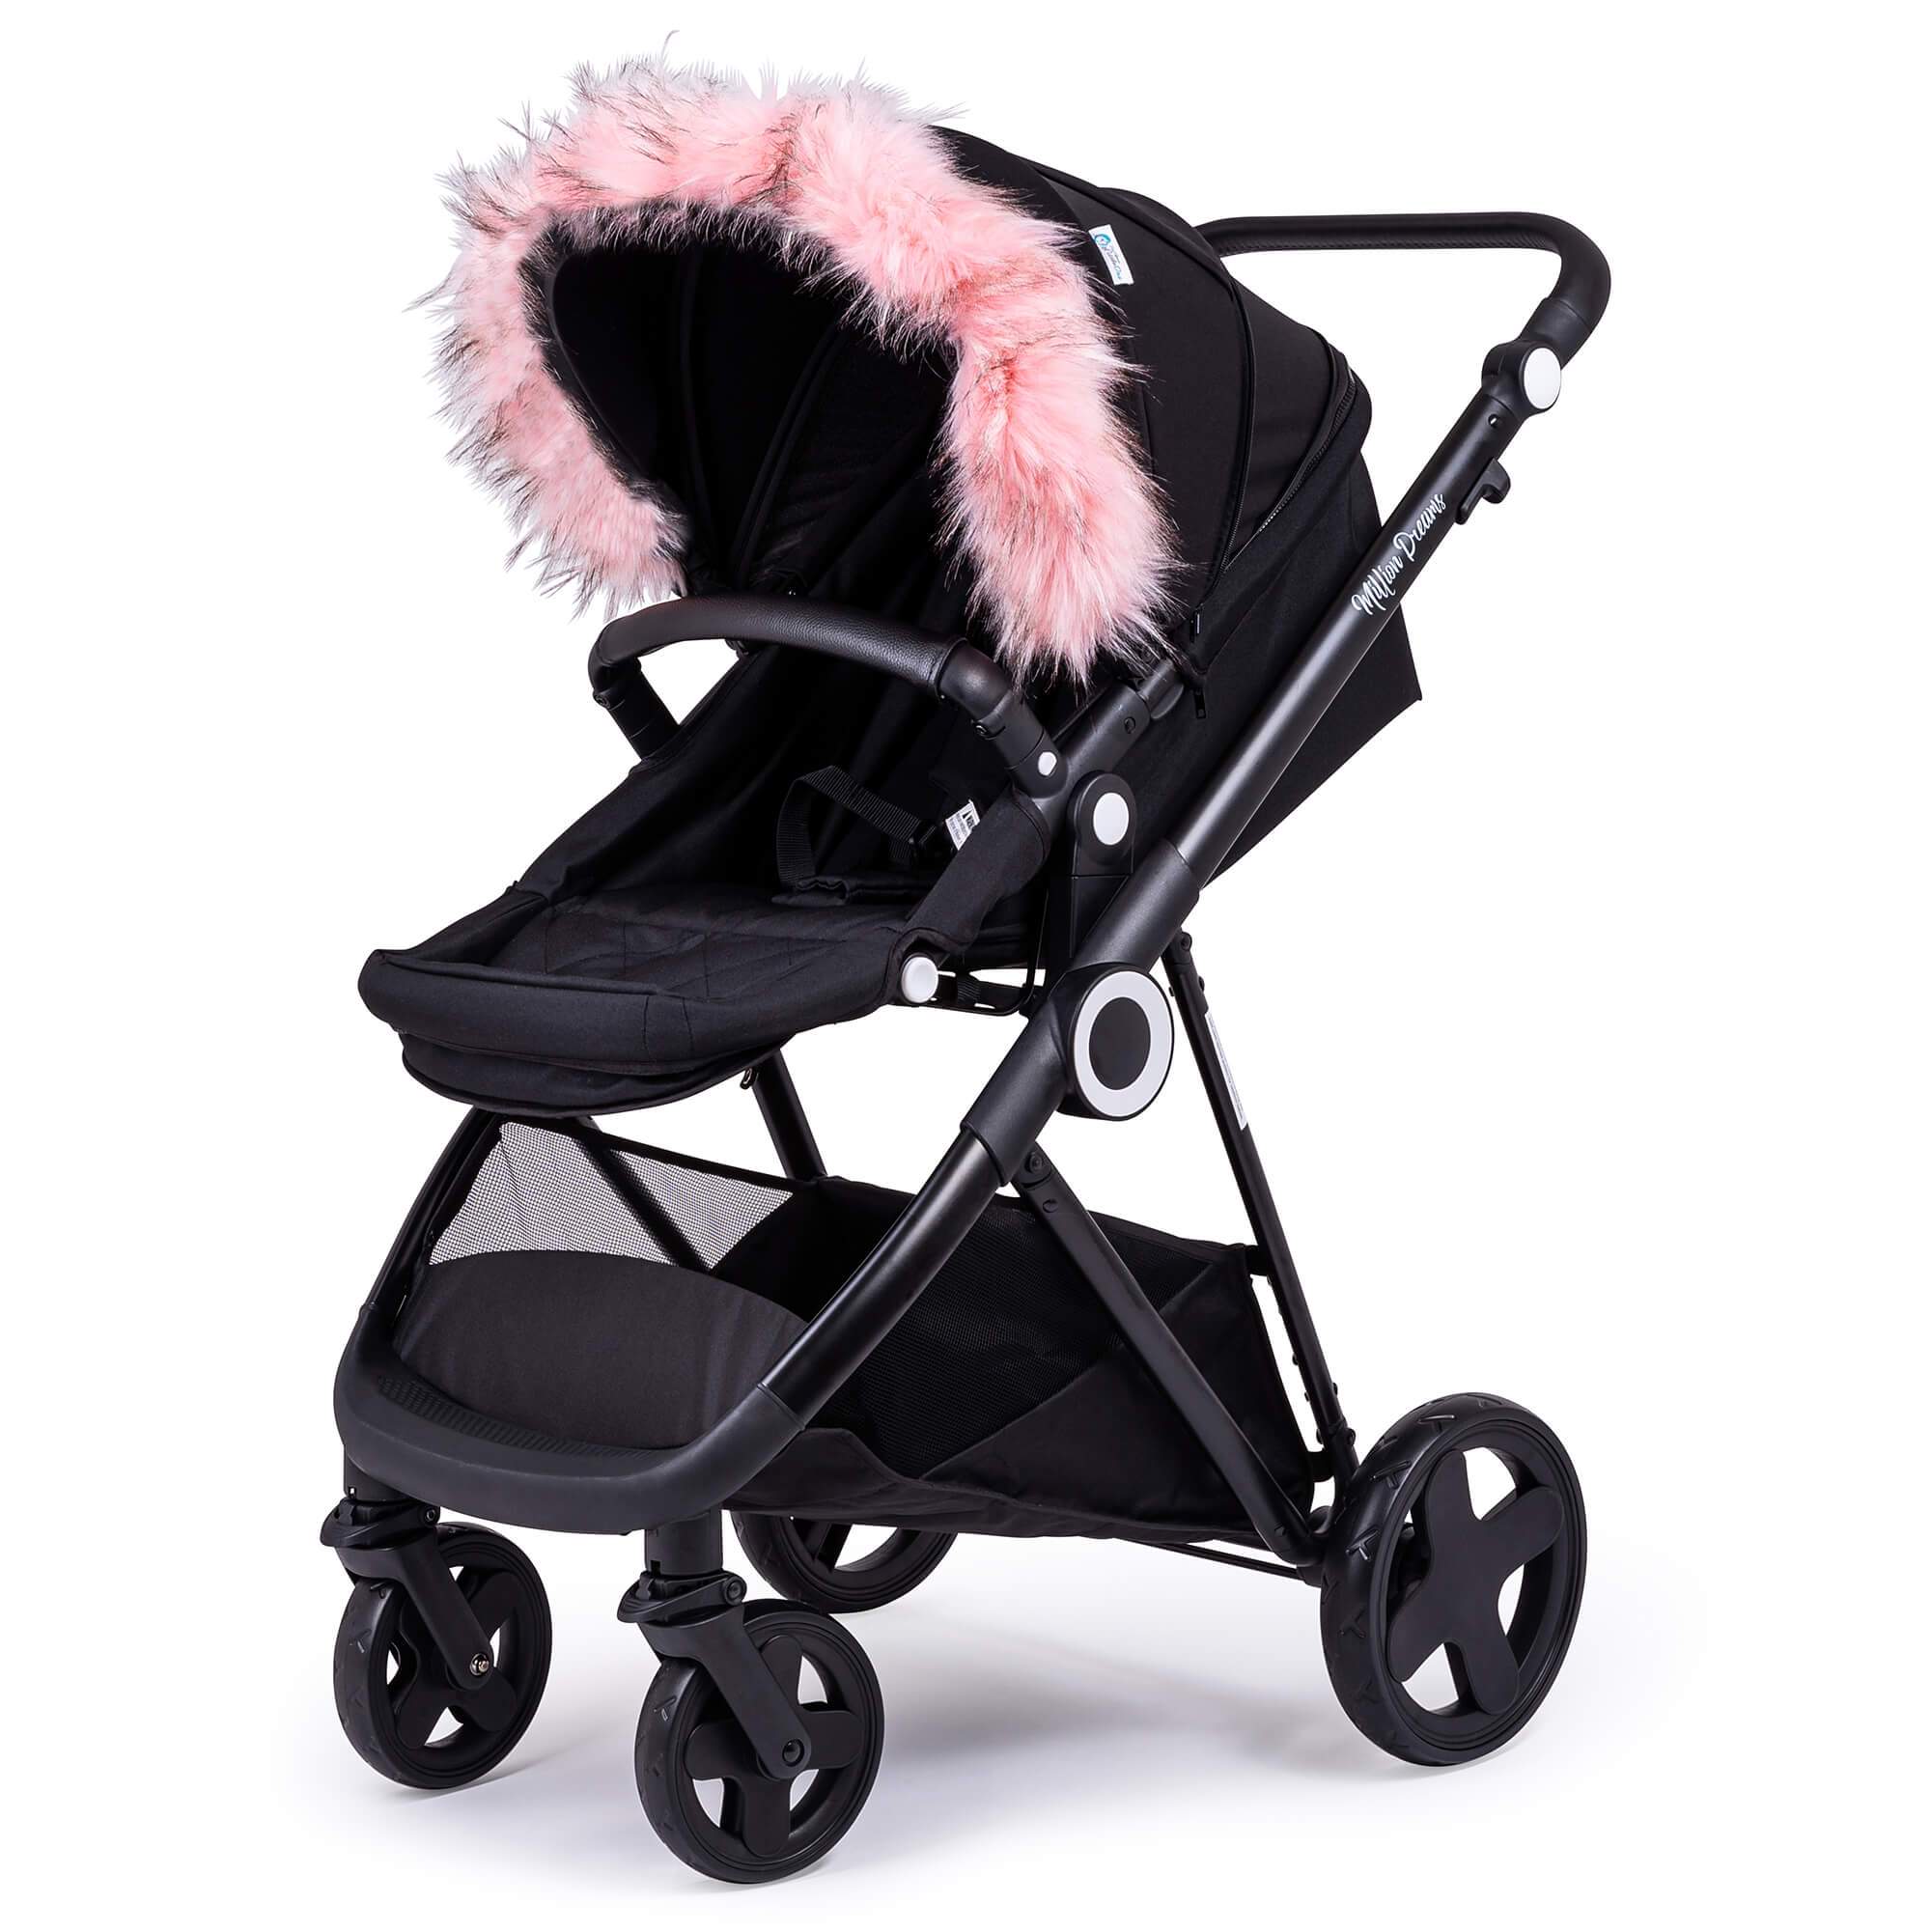 Pram Fur Hood Trim Attachment for Pushchair Compatible with Mountain Buggy - Light Pink / Fits All Models | For Your Little One